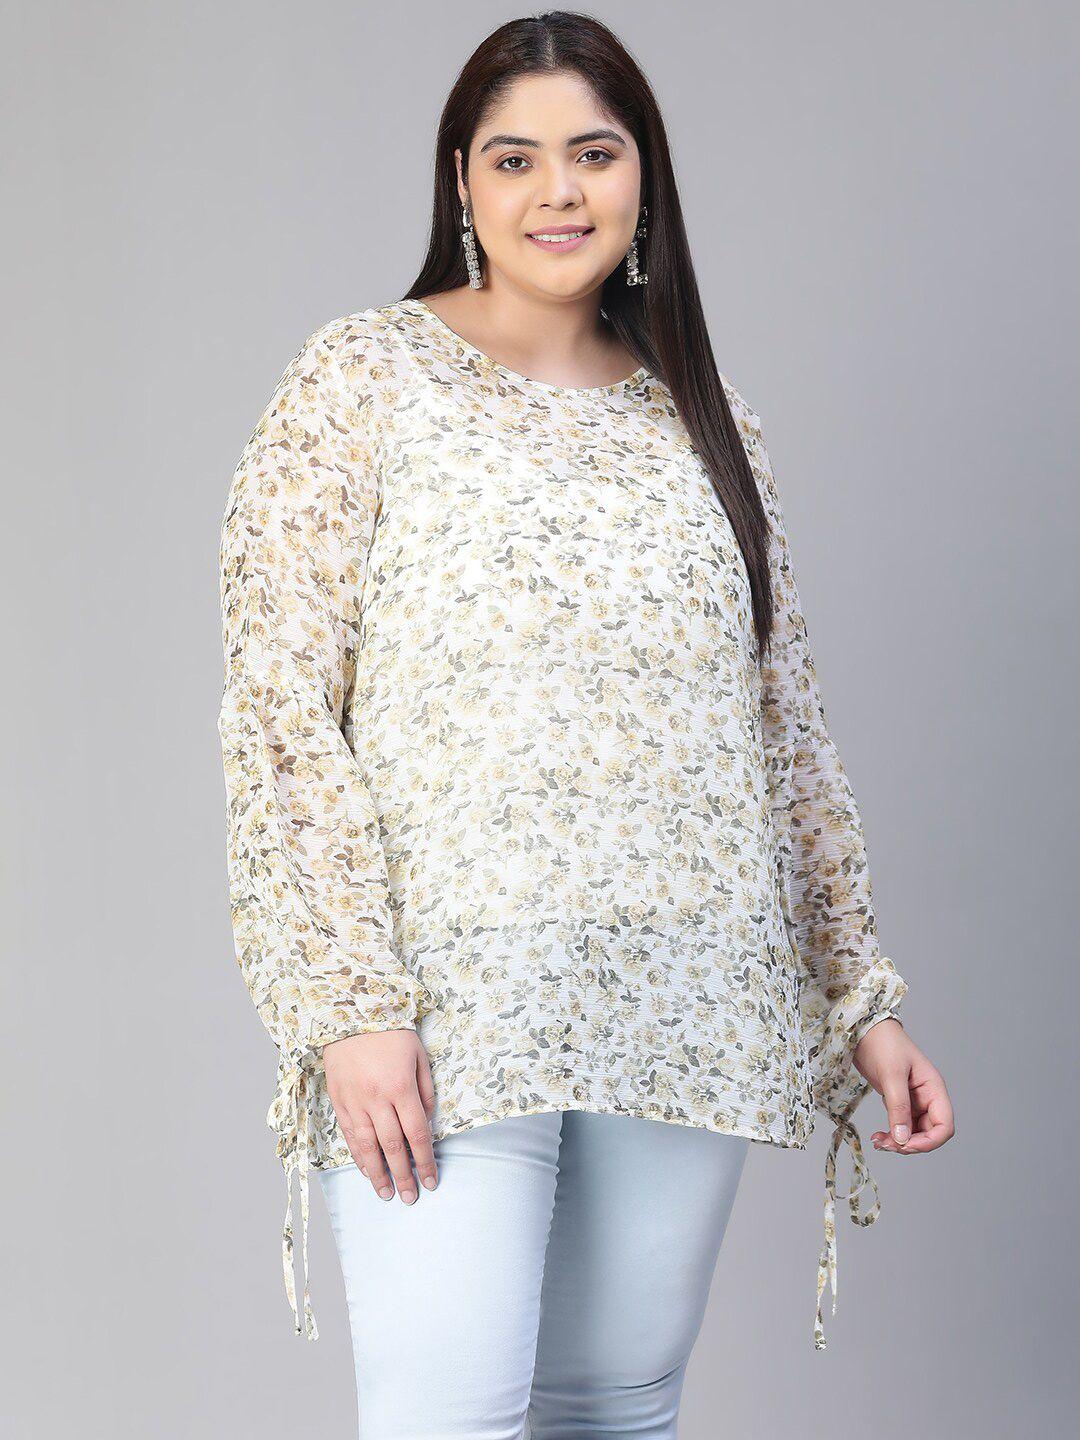 oxolloxo plus size floral printed bell sleeve chiffon top